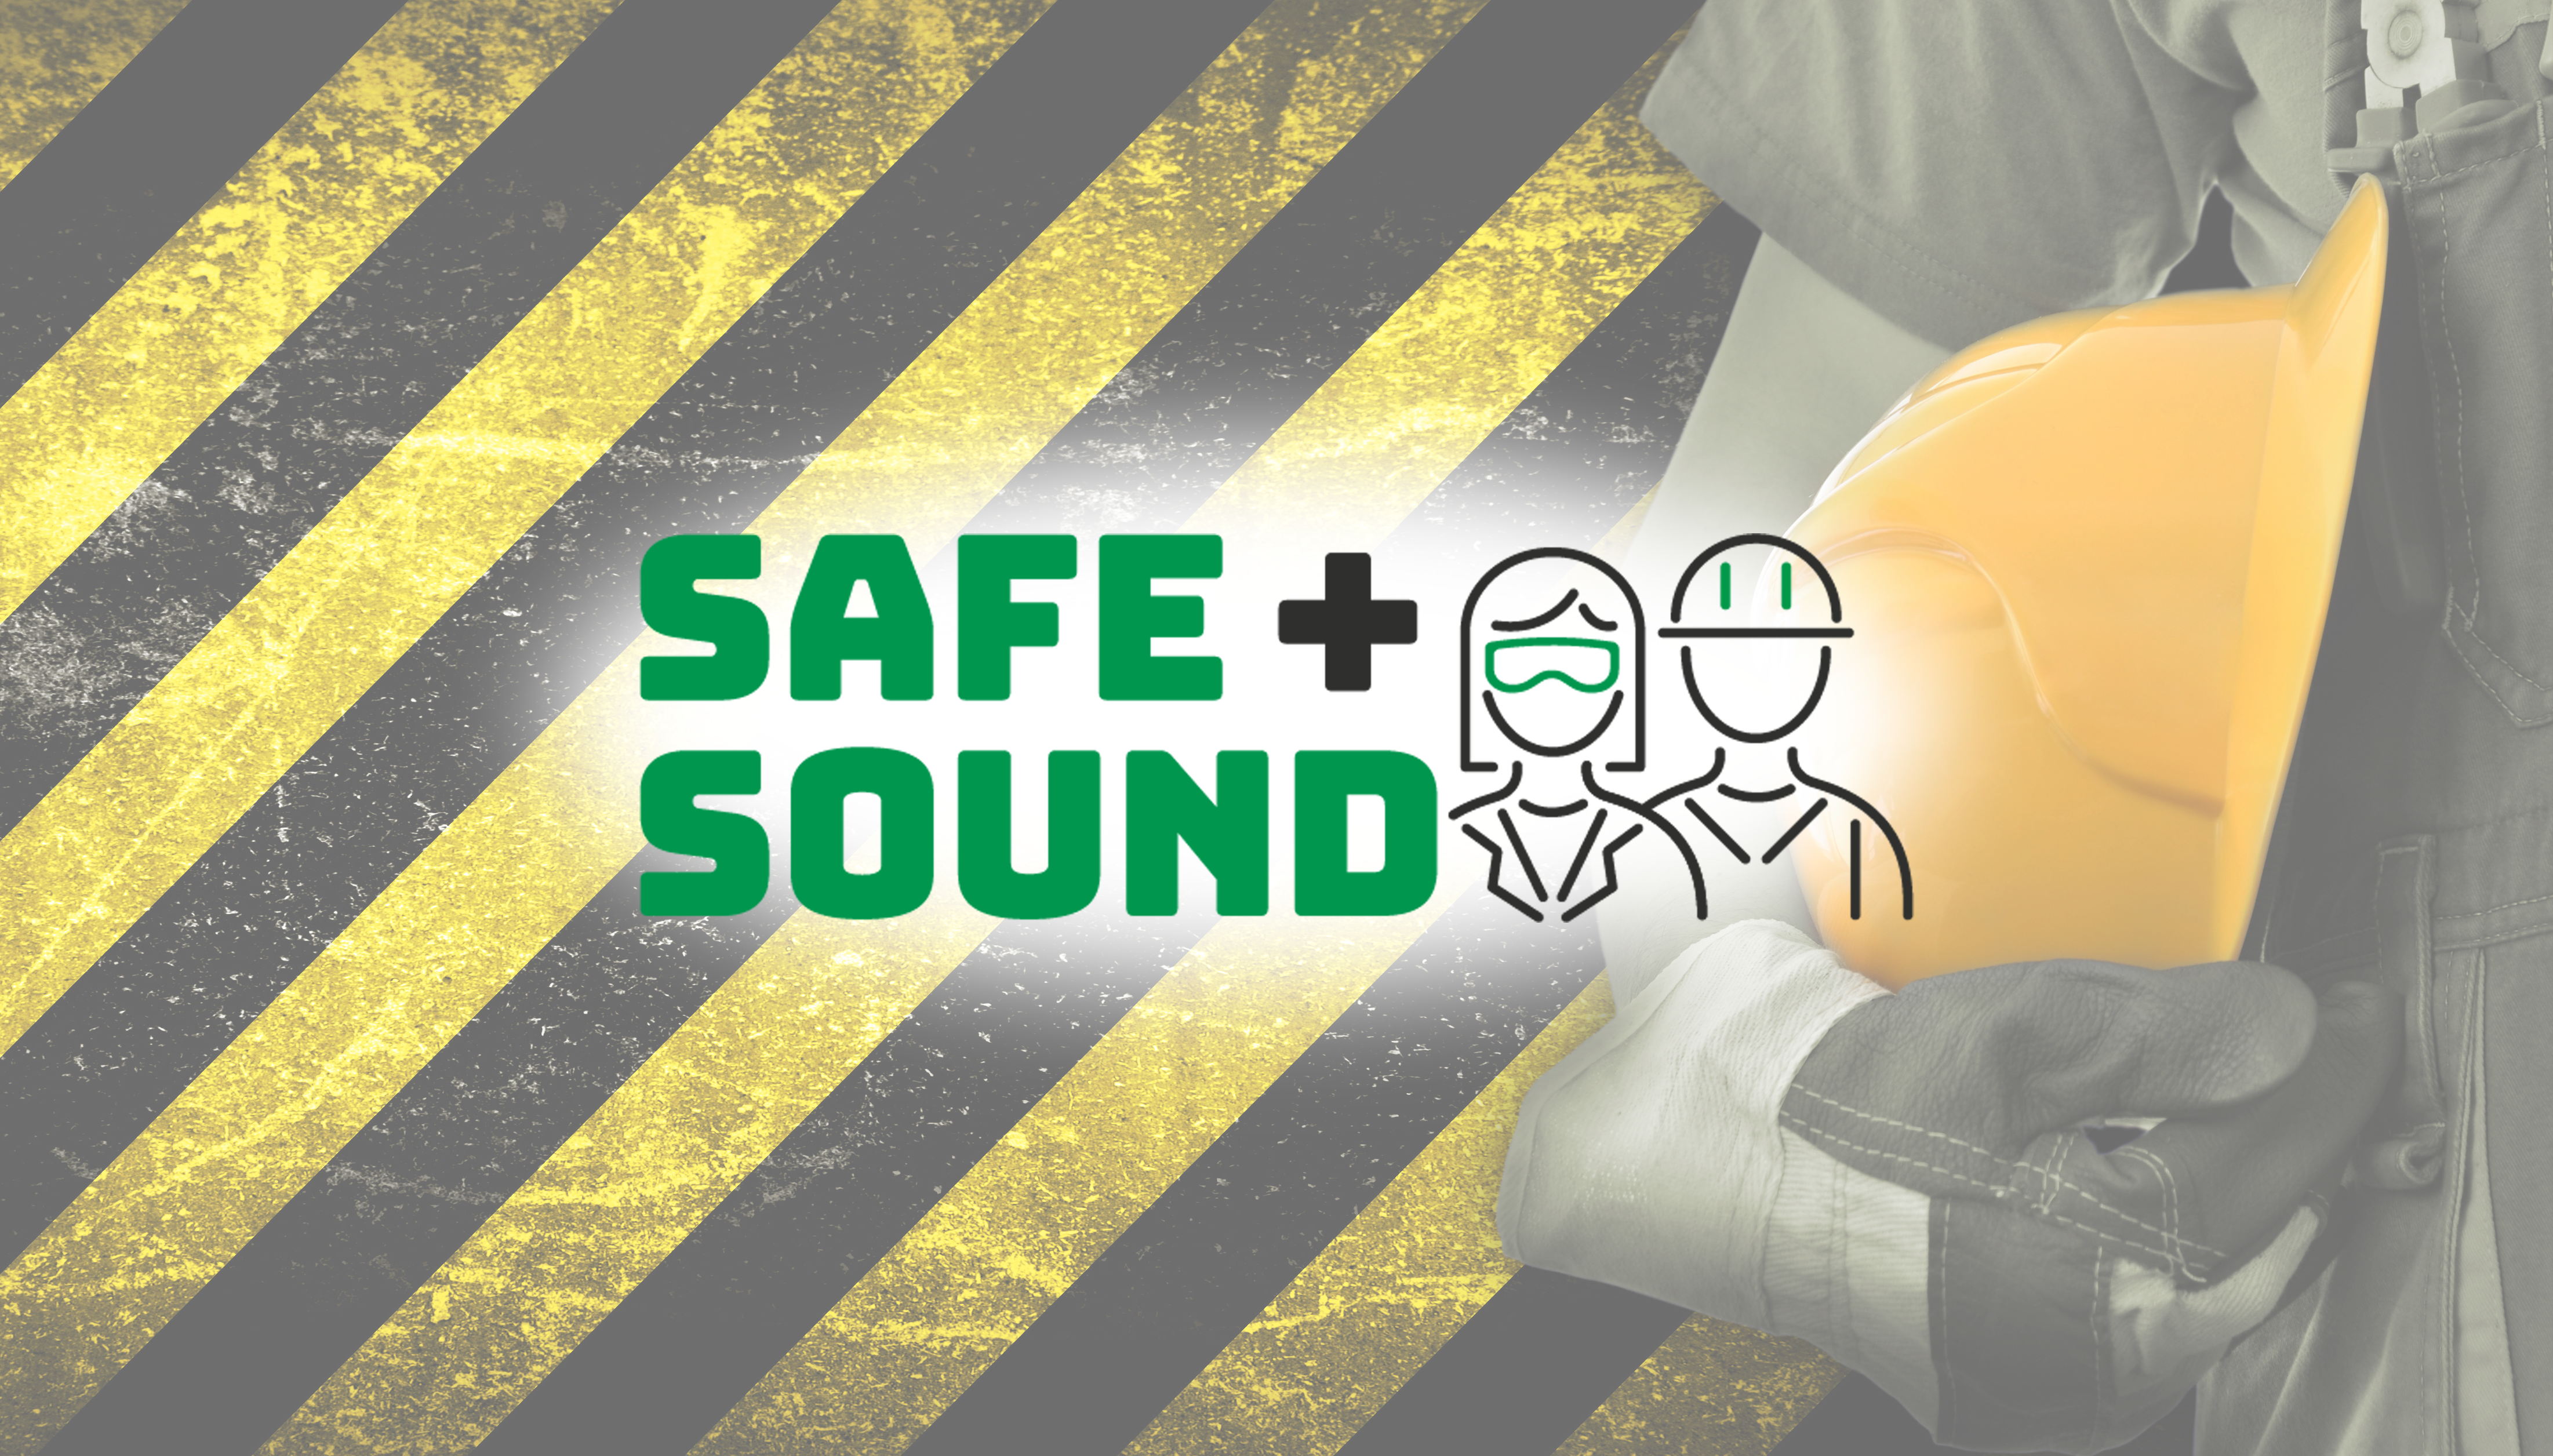 Safe + Sound Week 2020: Recognizing Successful Safety & Health Programs